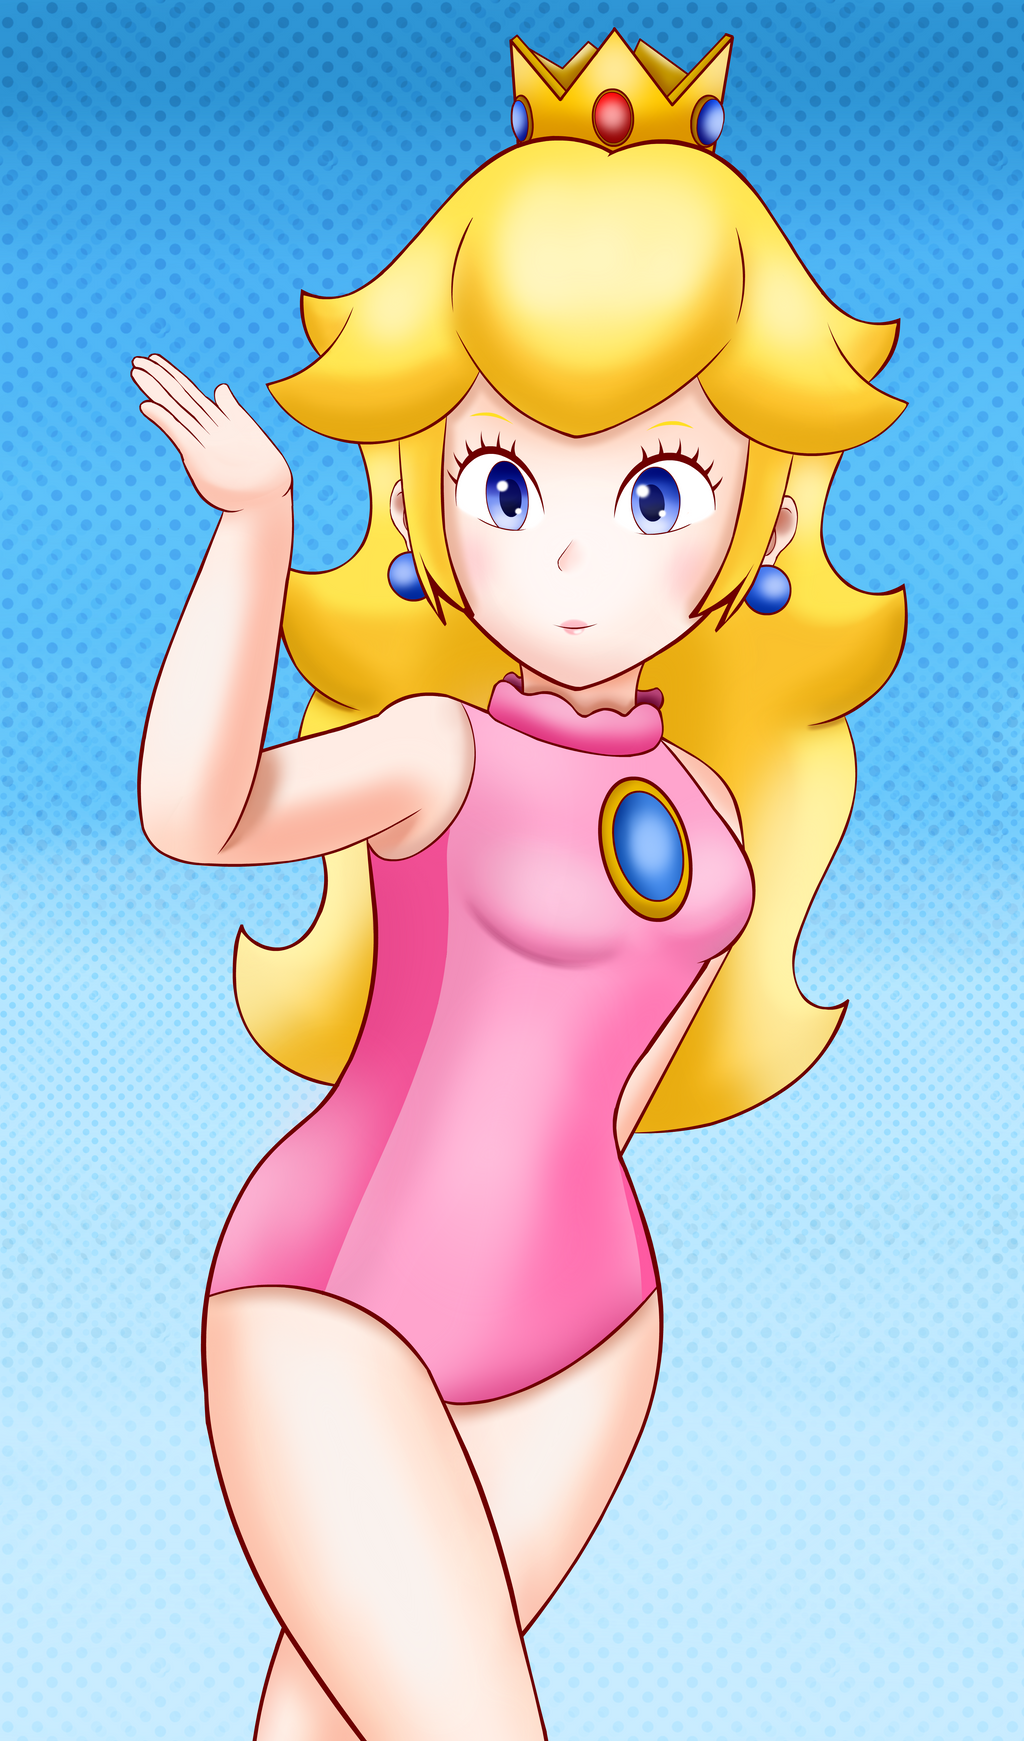 Princess Peach Olympics Outfit By Chino Spike On Deviantart 